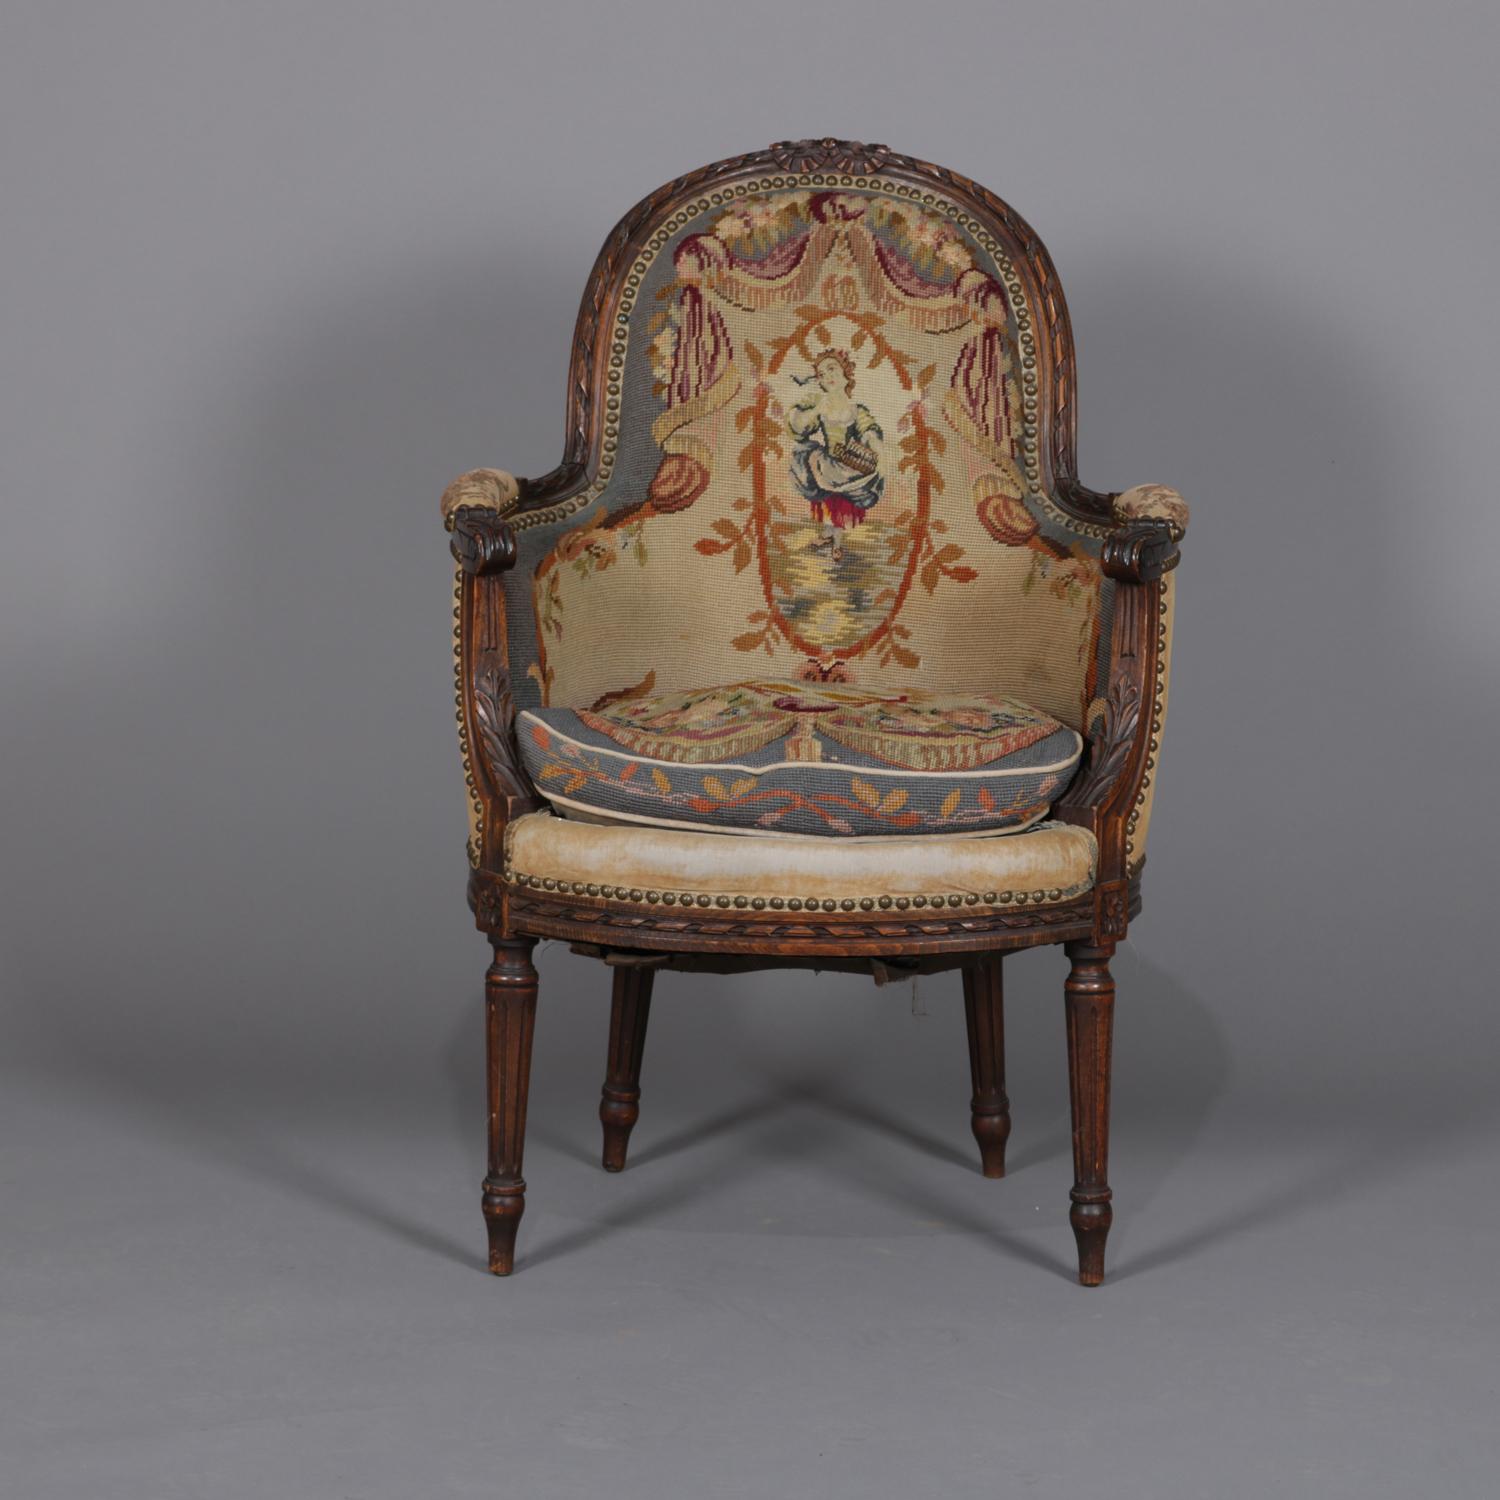 An antique French Louis XV style armchair features mahogany frame with carved relief ornament and scroll form arms, tapestry upholstered with central portrait with surrounding foliate motif, circa 1875.

Measures: 37